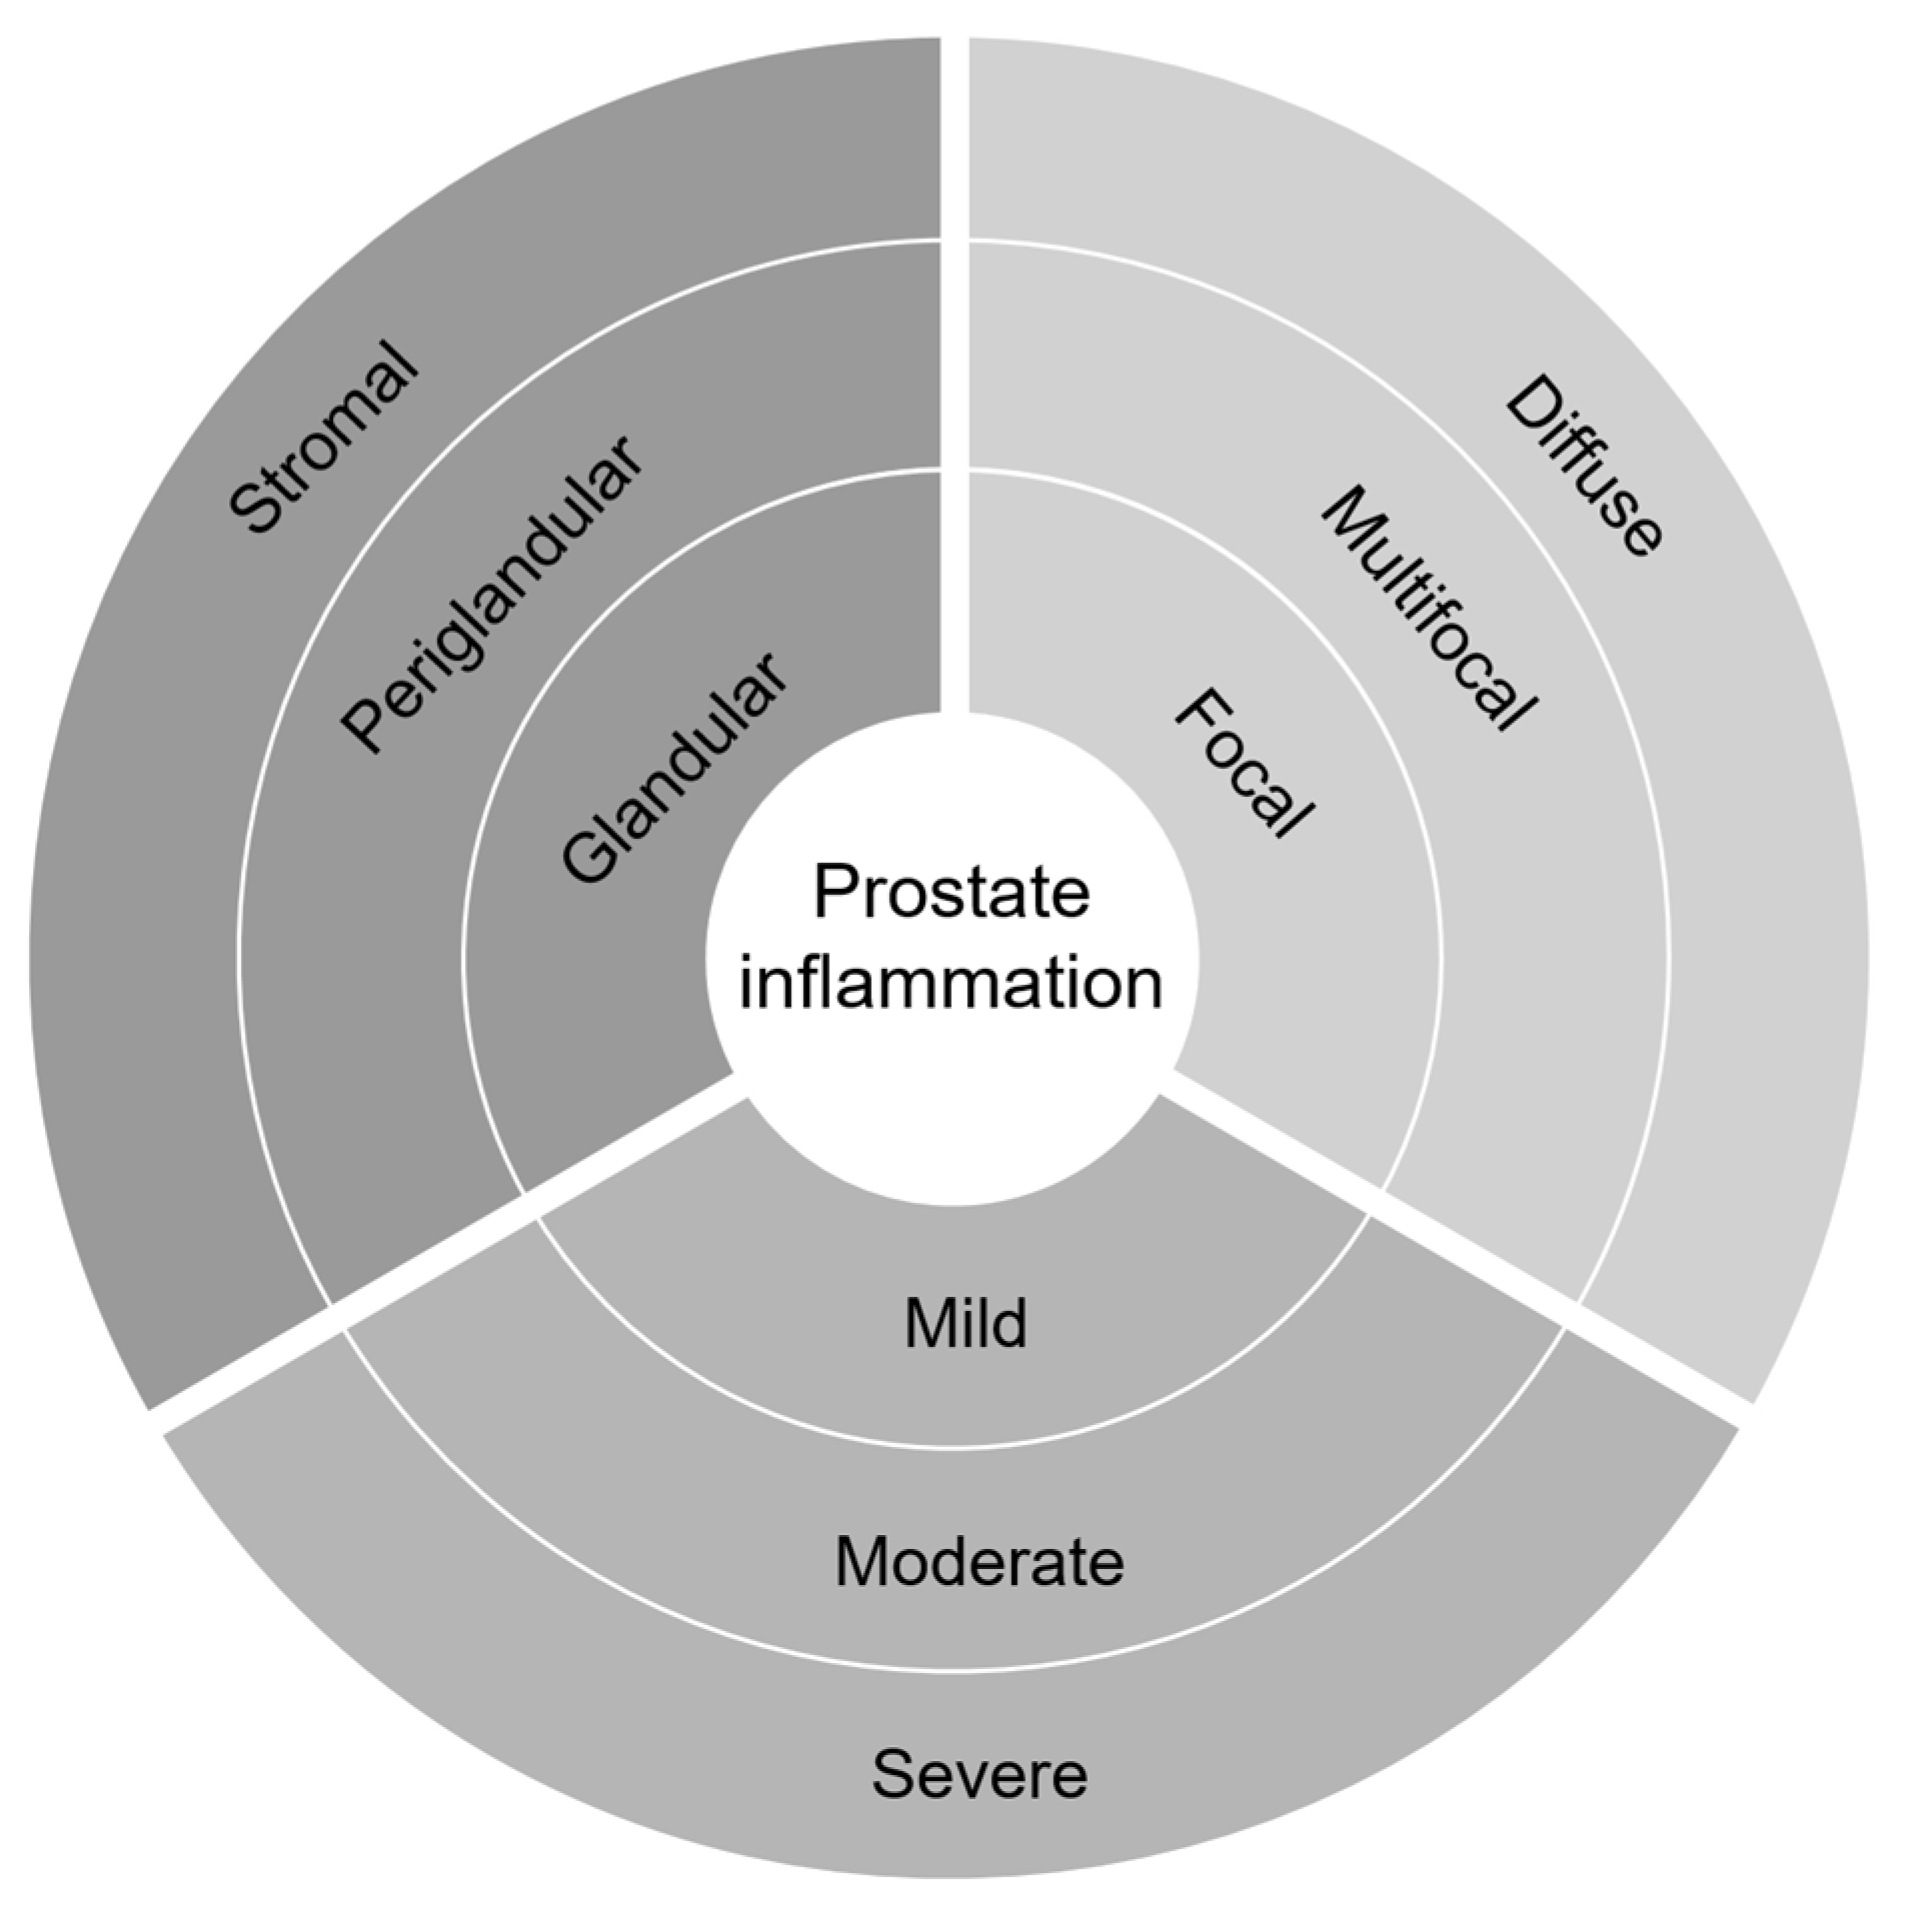 Cancers | Free Full-Text | Inflammation and Prostate Cancer: A  Multidisciplinary Approach to Identifying Opportunities for Treatment and  Prevention